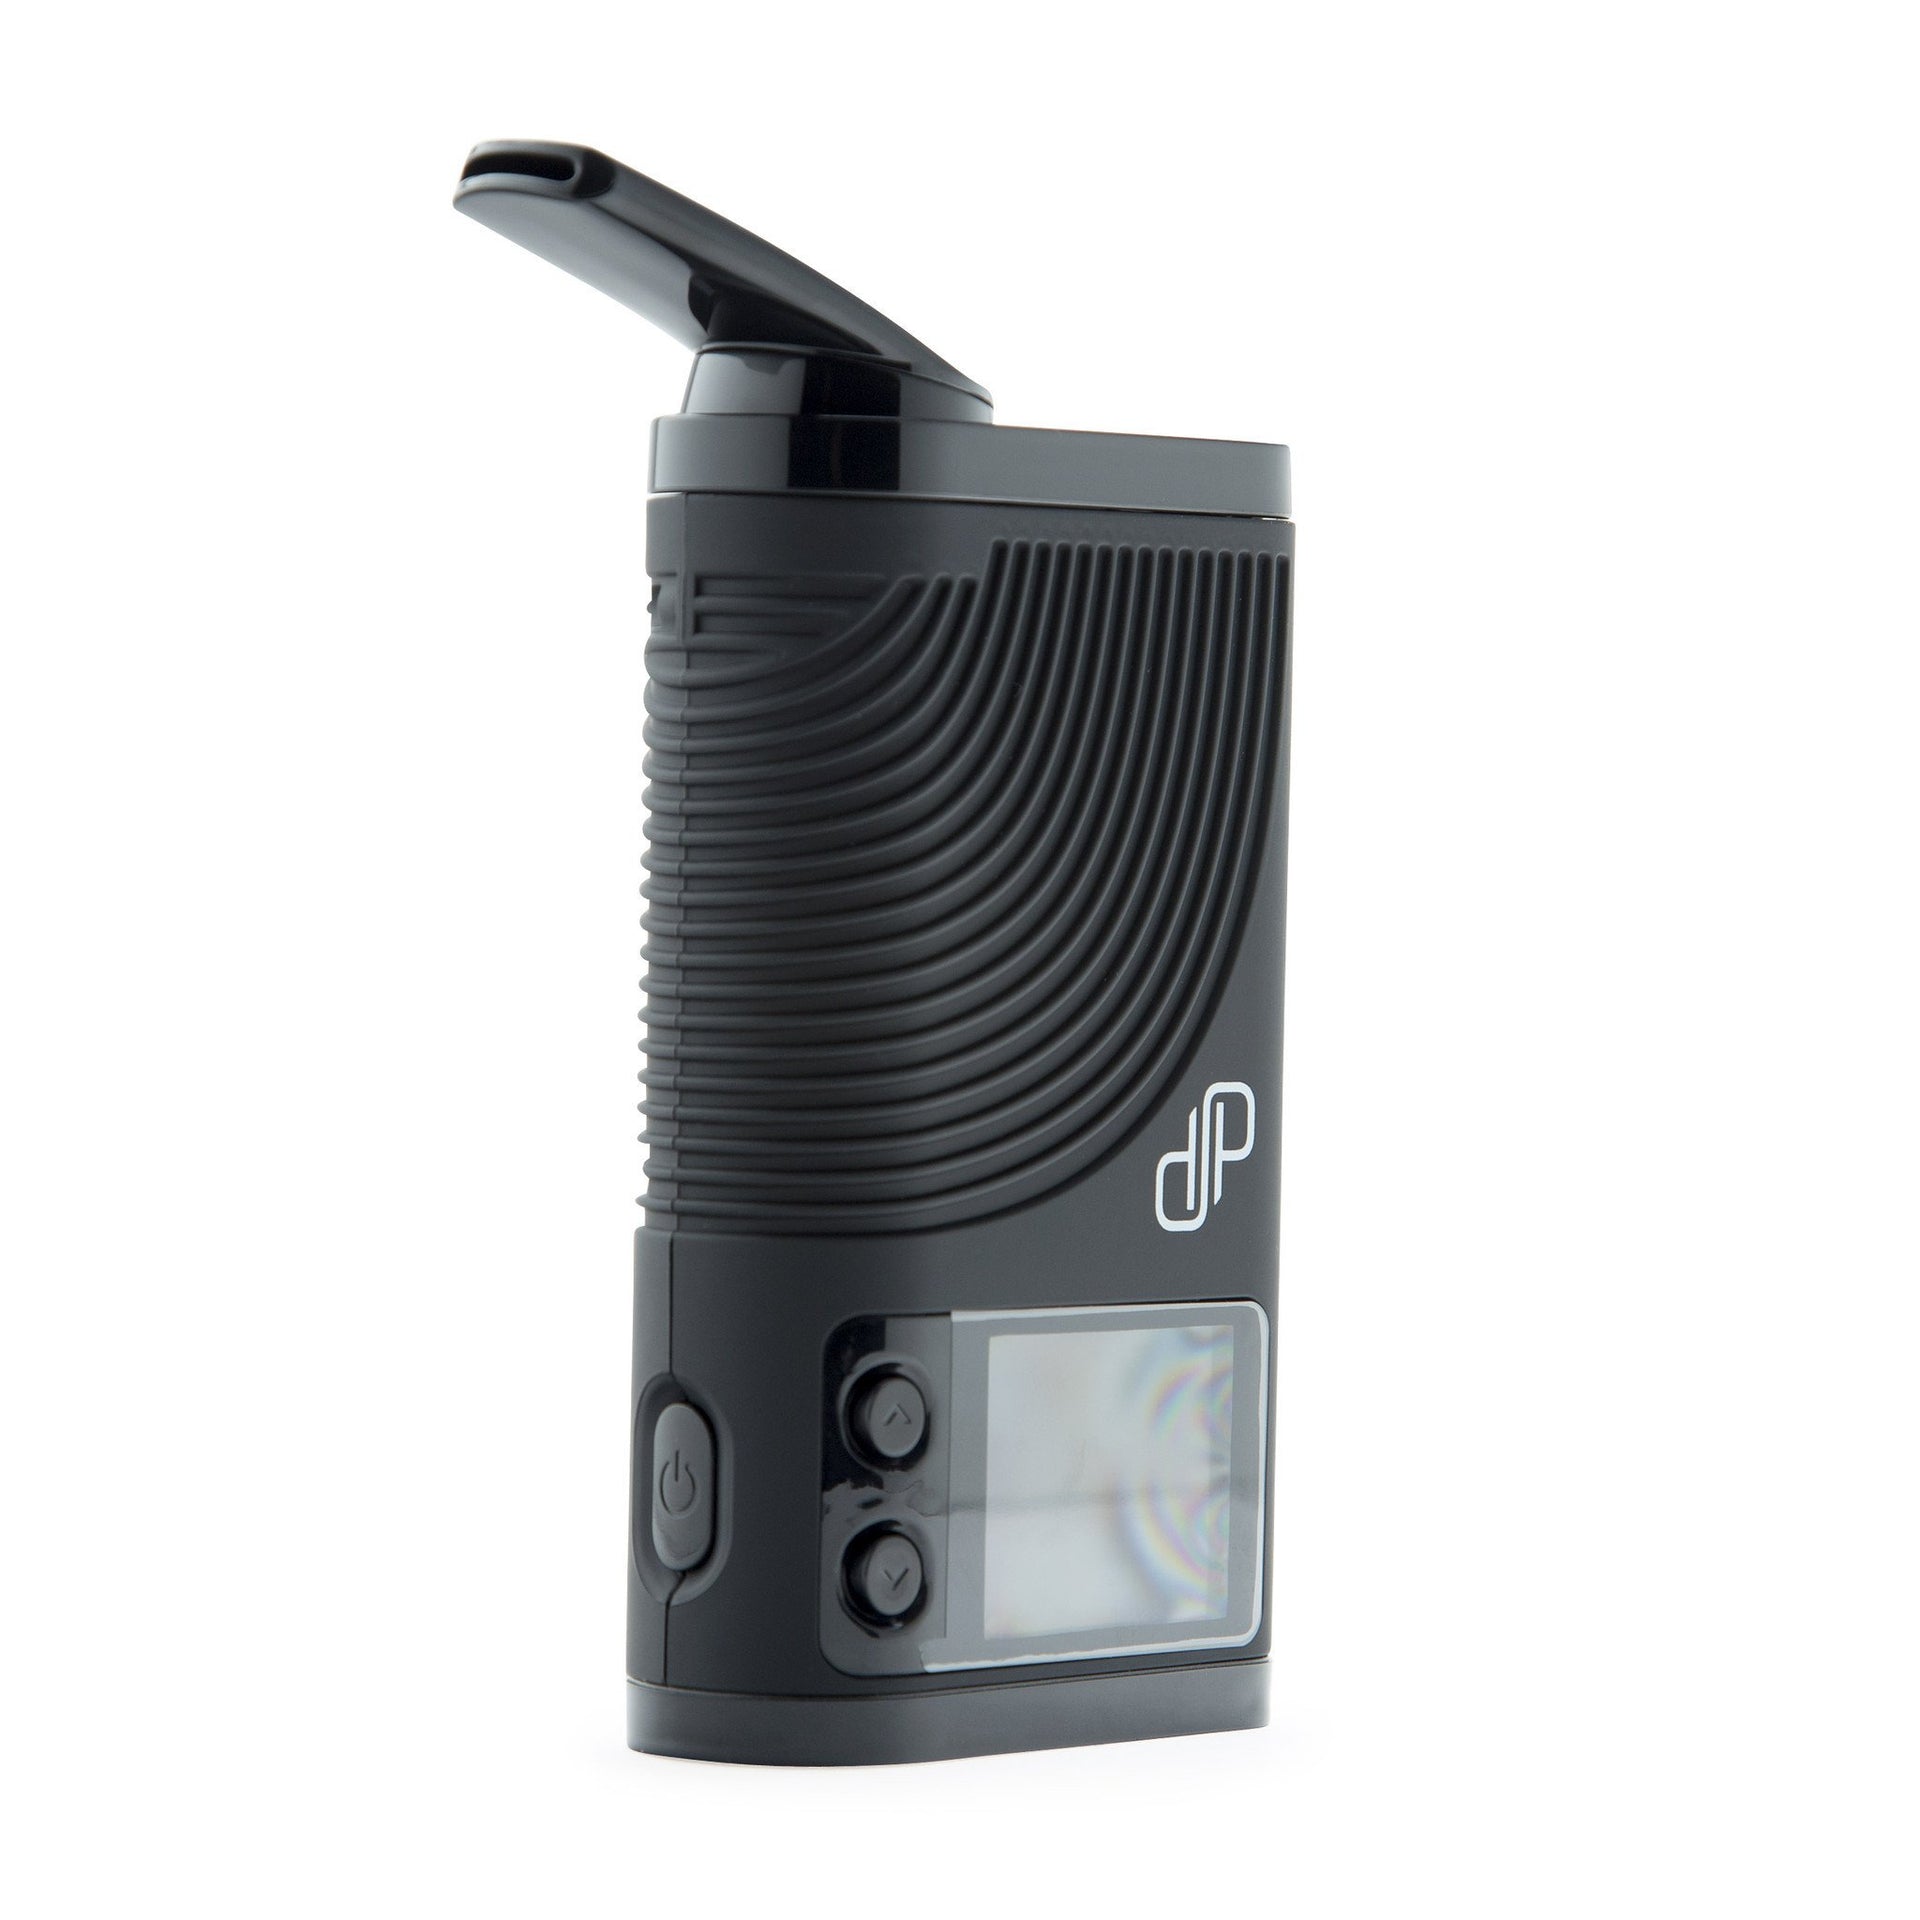 Pearly lol Indica Boundless CFX Vaporizer / $ 179.99 at 420 Science